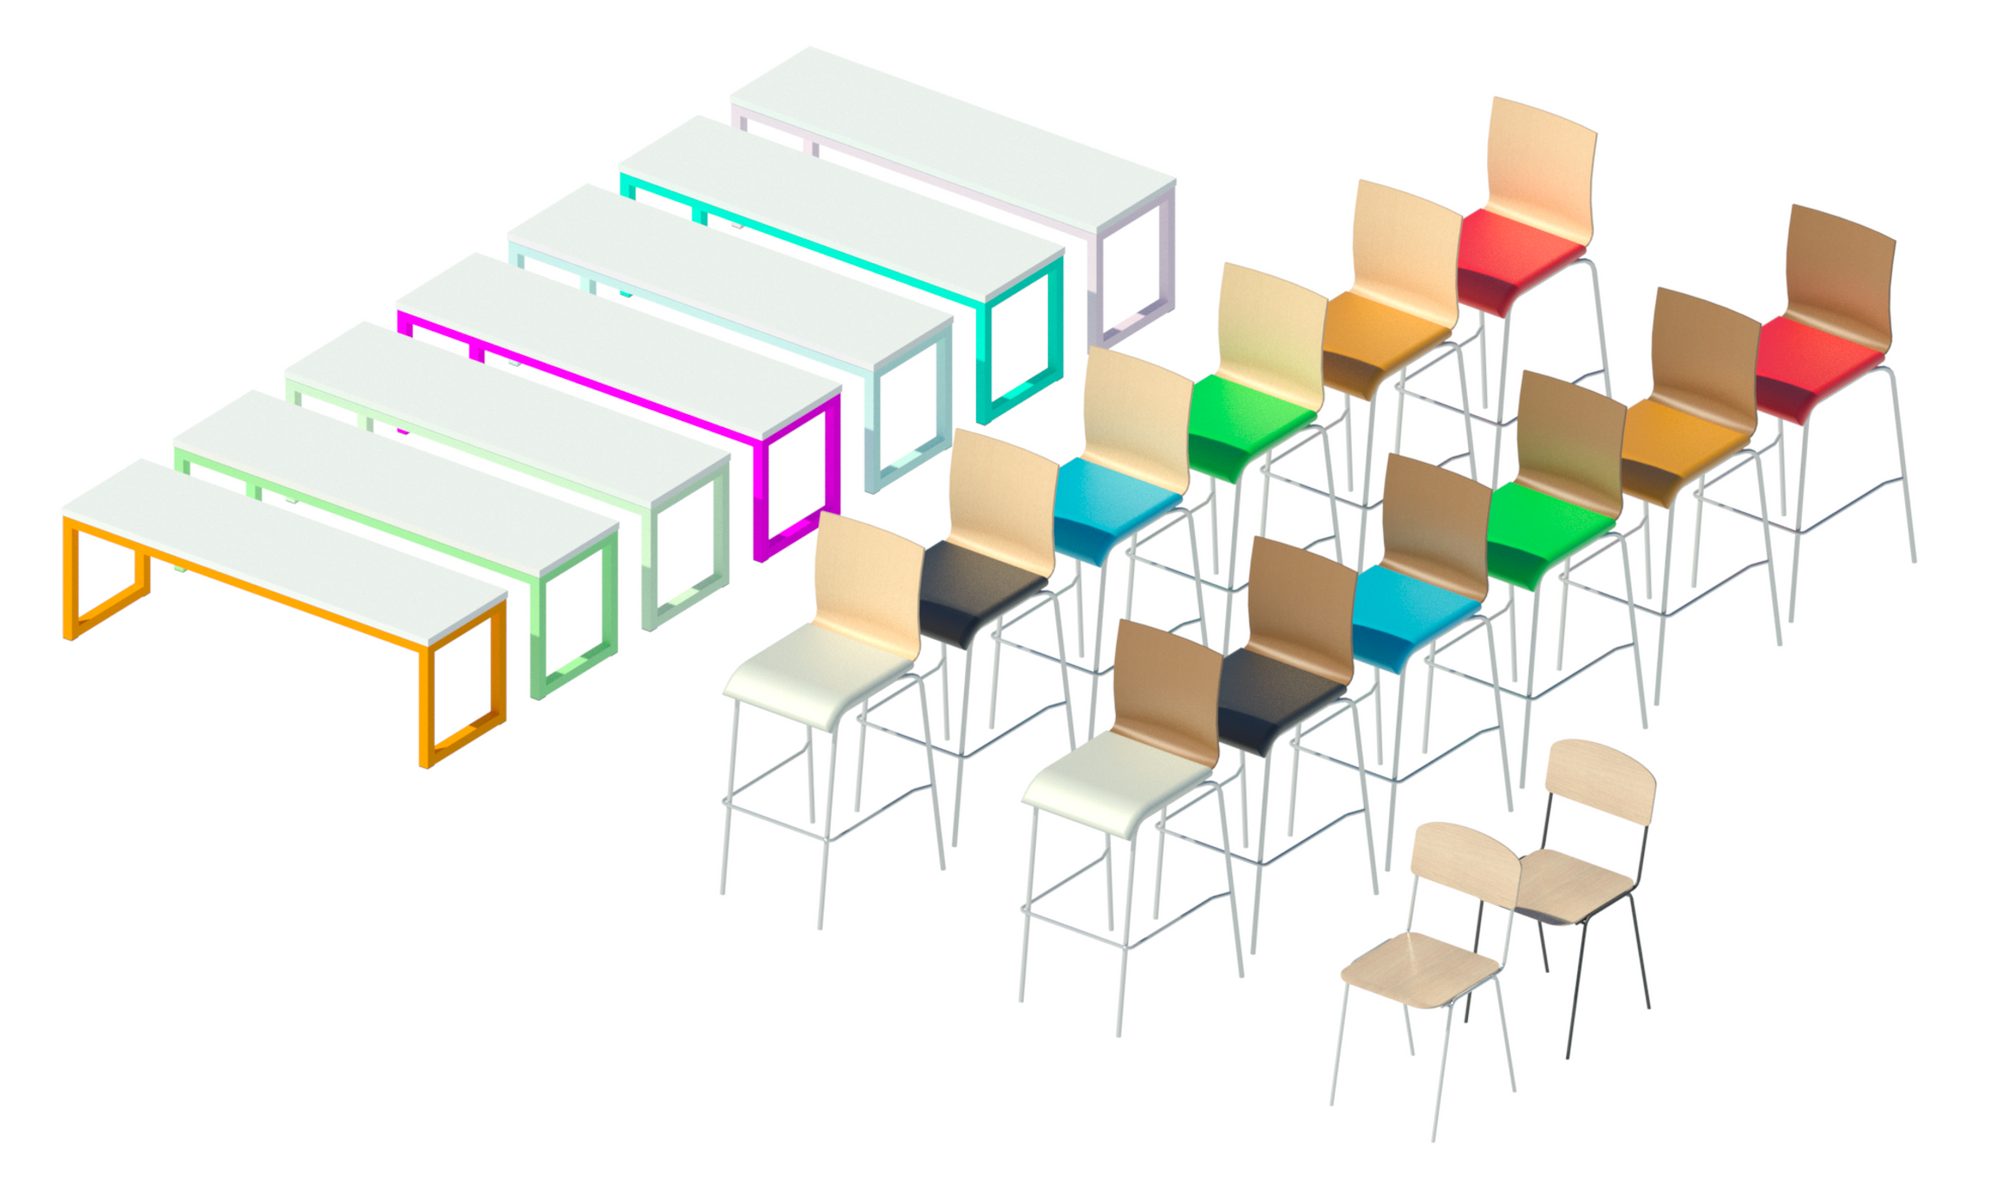 Revit families for benches, stools and cafeteria chairs in a variety of frame and seat materials.